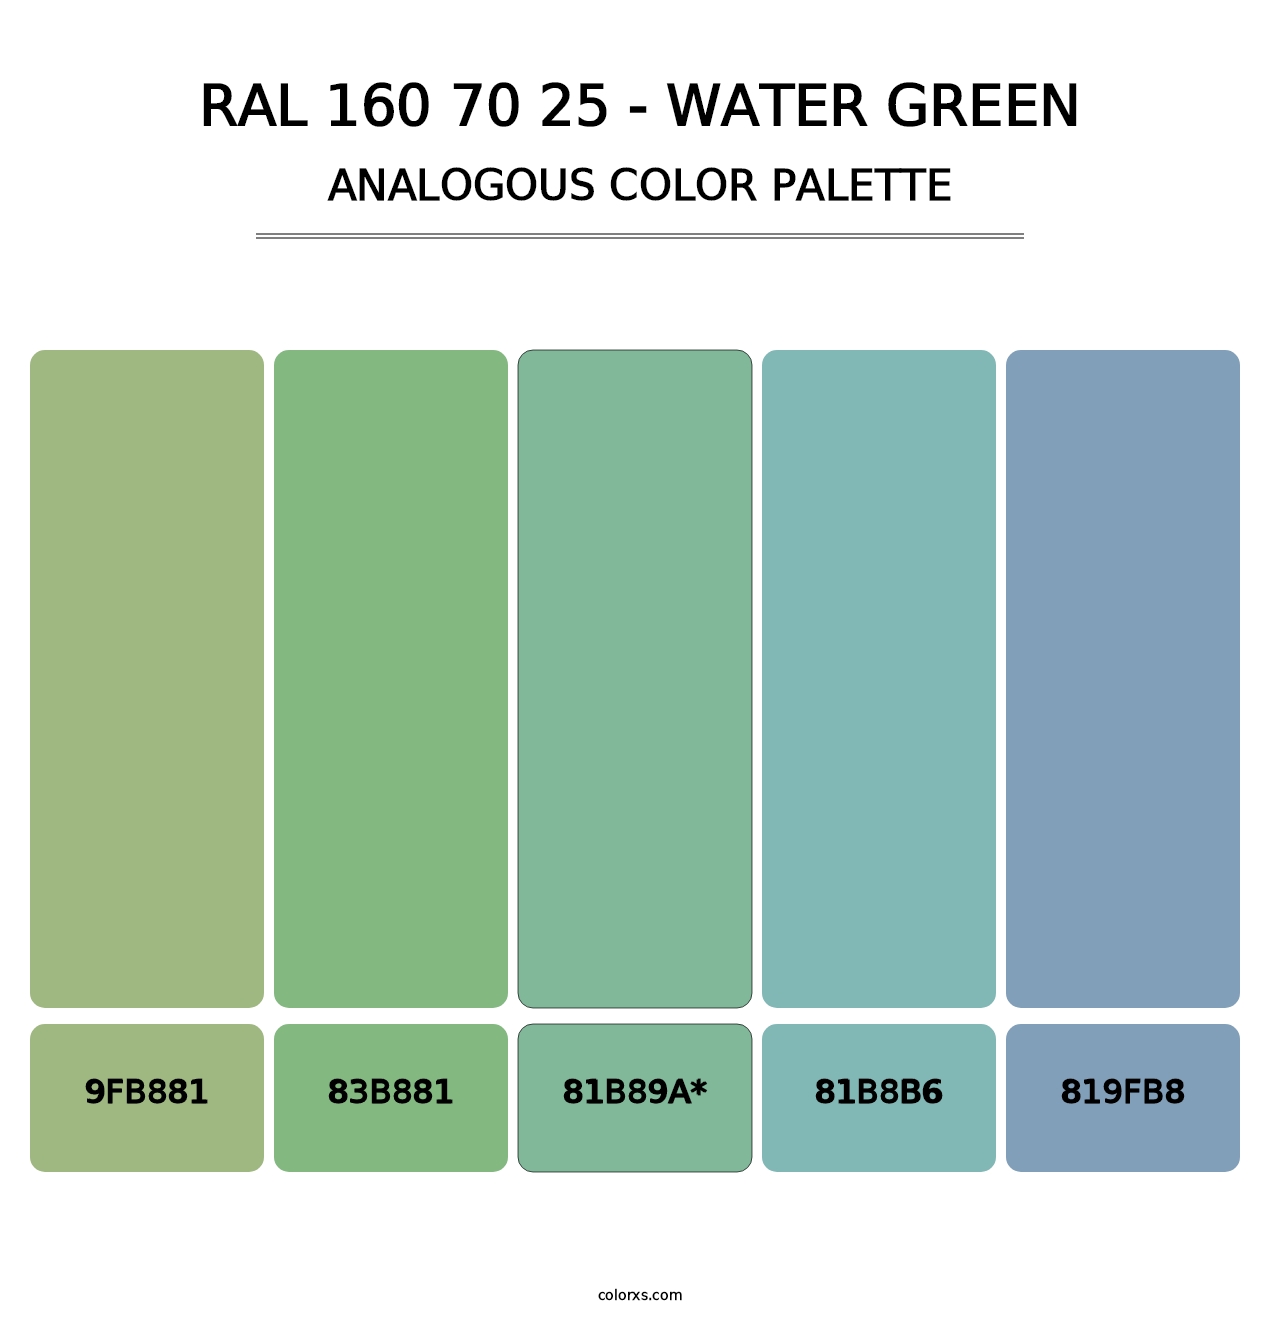 RAL 160 70 25 - Water Green - Analogous Color Palette